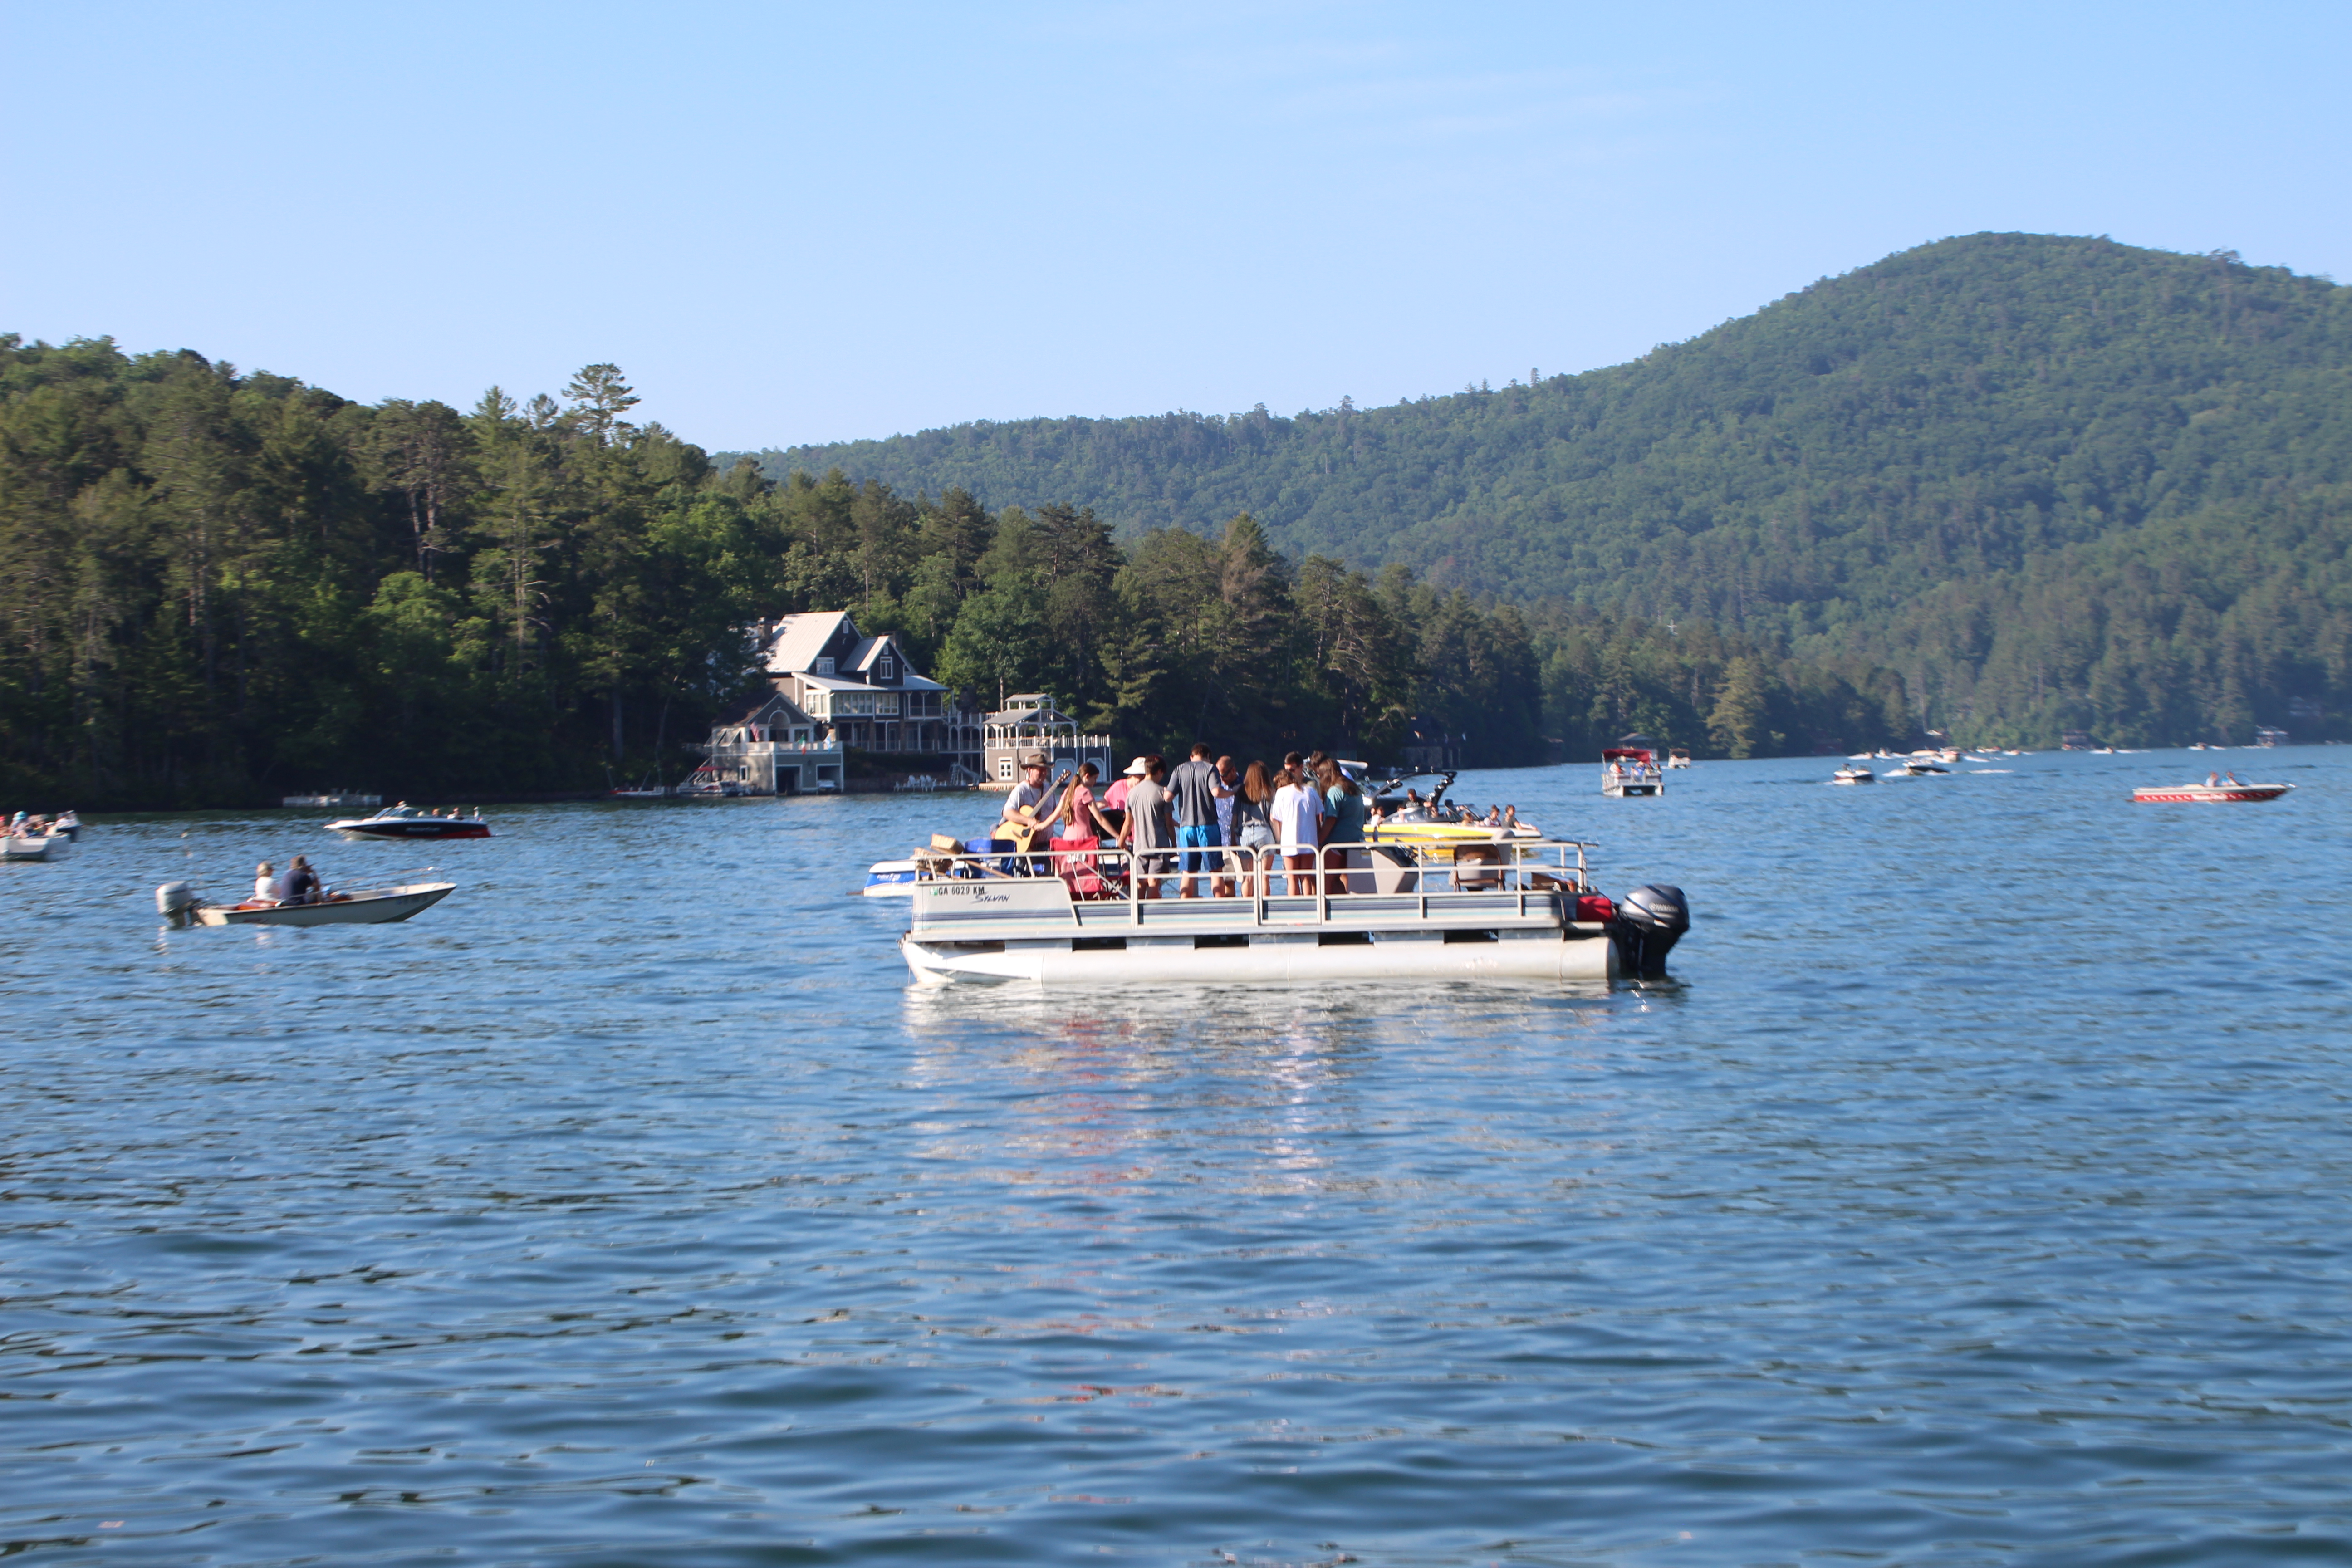 The Rev. Zack Martin and the Rev. Jeremy Noffsinger pray with the youth group on a pontoon boat at Lake Rabun for boat church at Clayton First United Methodist Church. (Photo/Megan Broome)